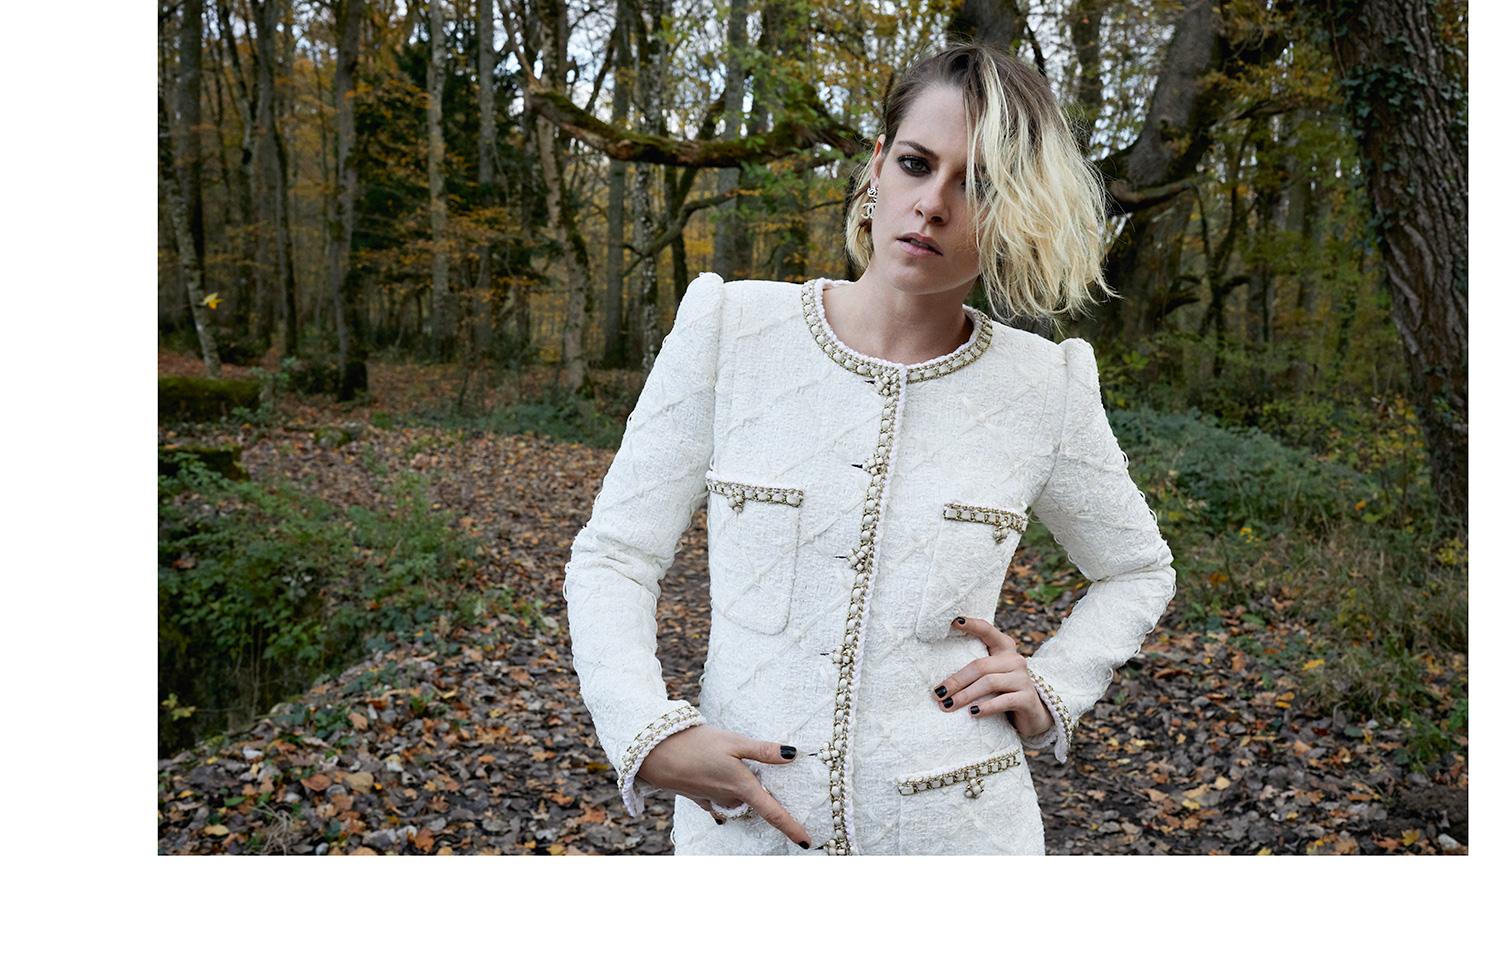 Go Behind the Scenes with Kristen Stewart on the Latest Chanel Campaign